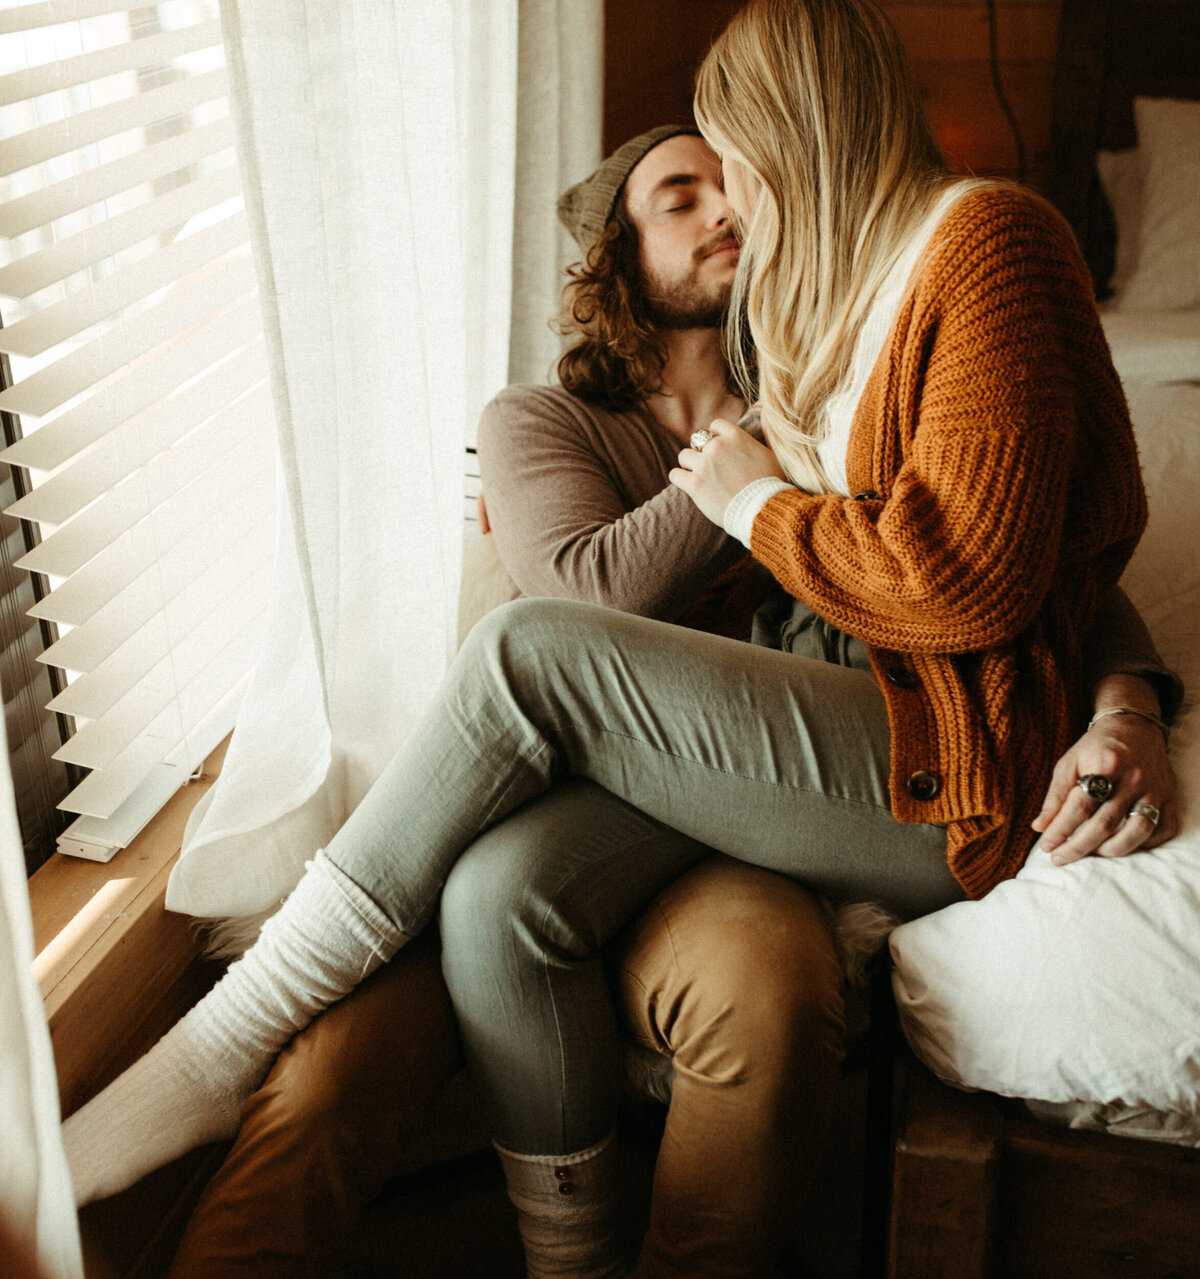 st-george-southern-utah-in-home-engagement-session-photoshoot-cozy-sweater-winter16